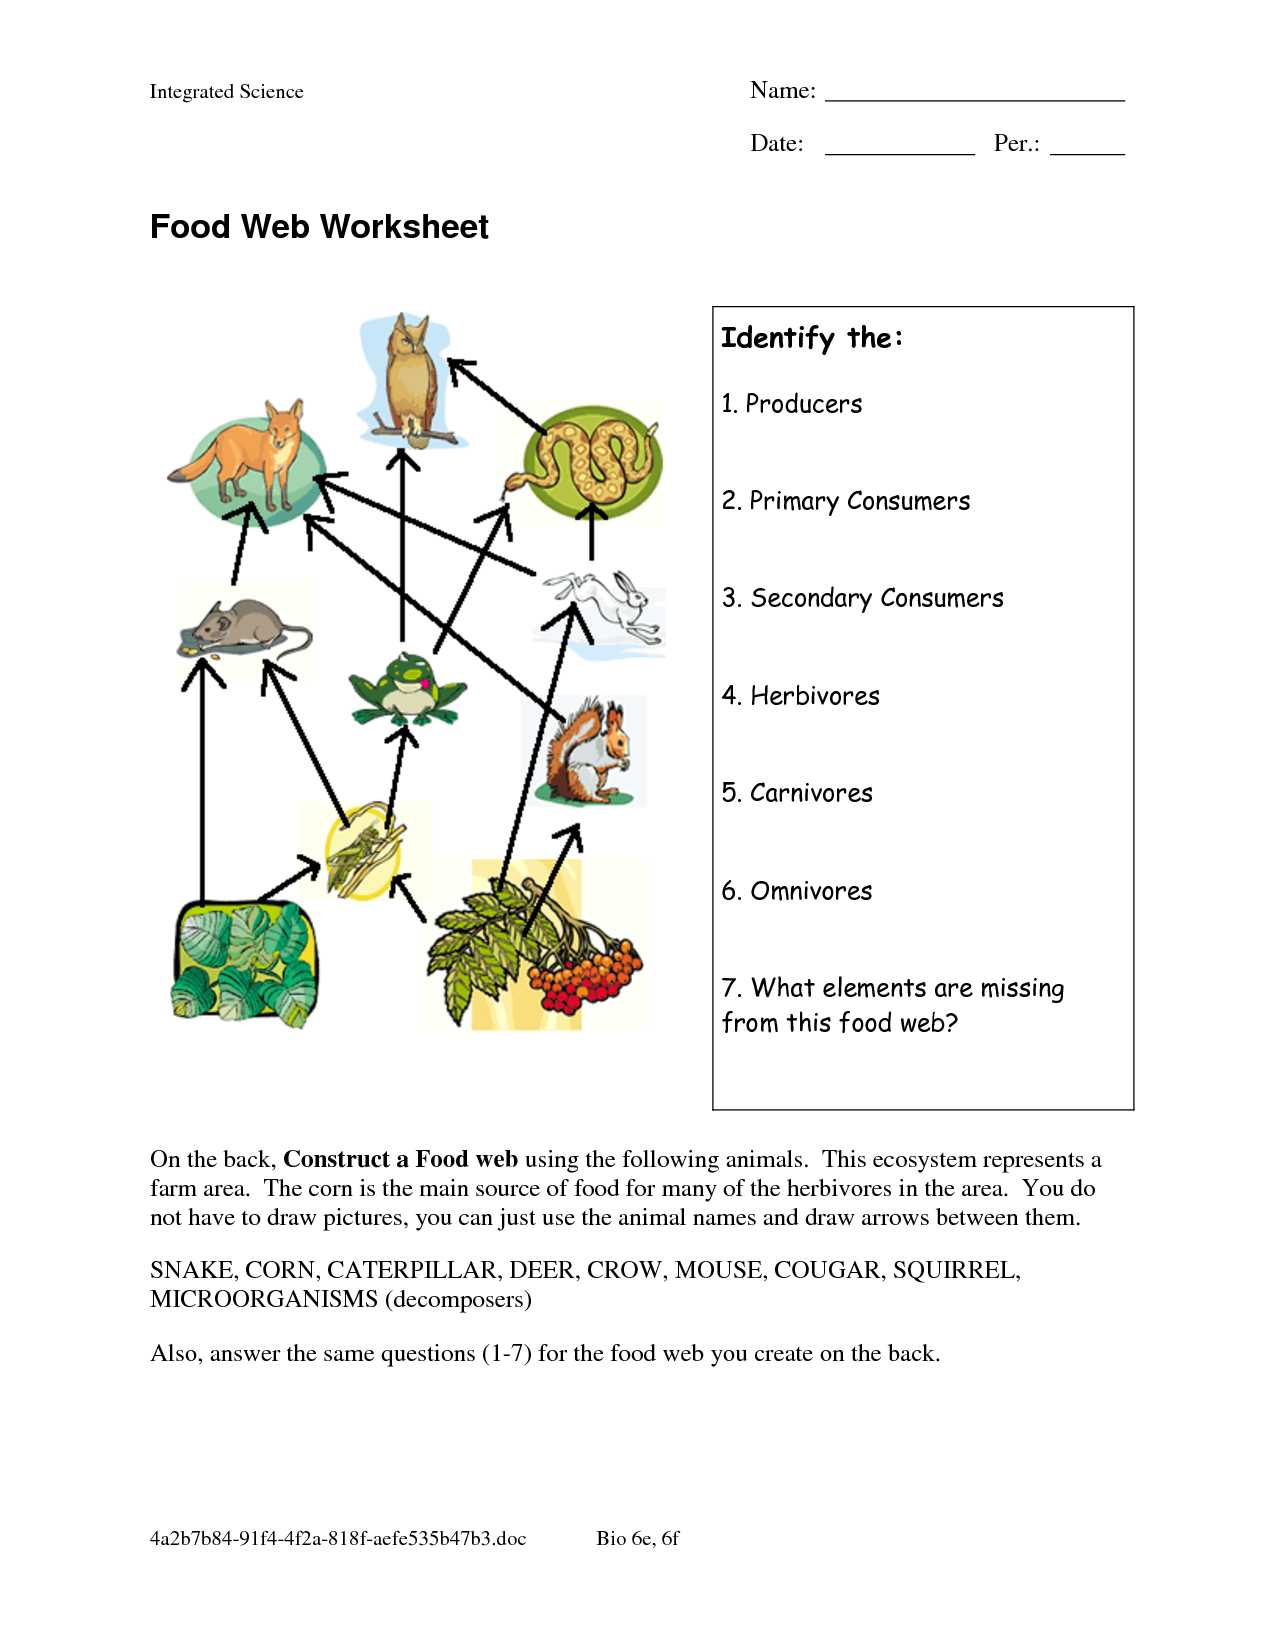 Build An atom Simulation Worksheet Answers as Well as Food Web Worksheets Food Web Worksheet Doc